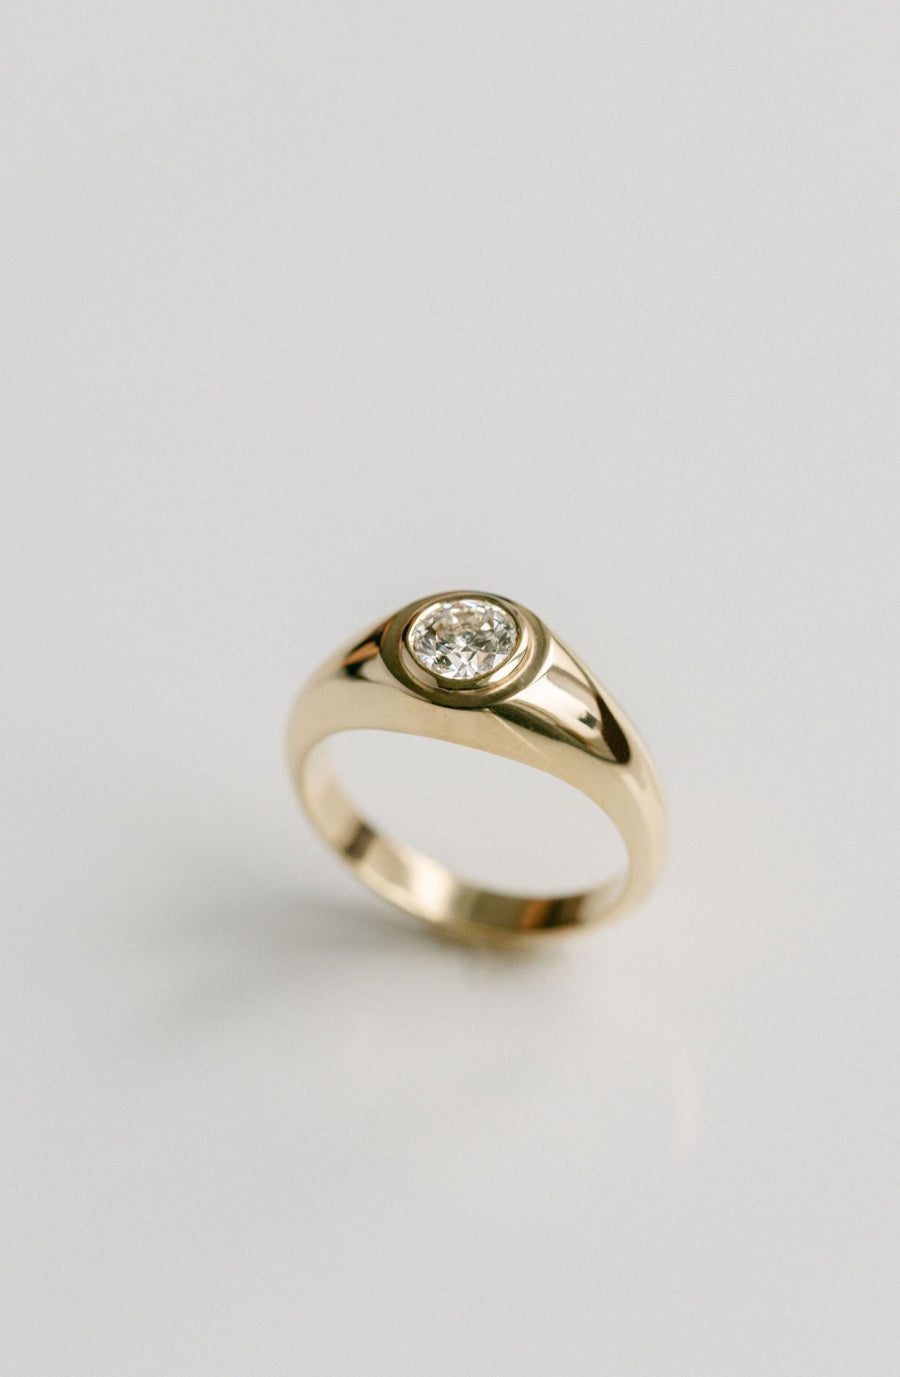 Polished Mens Signet Ring With Round Diamond, 14k Yellow Gold